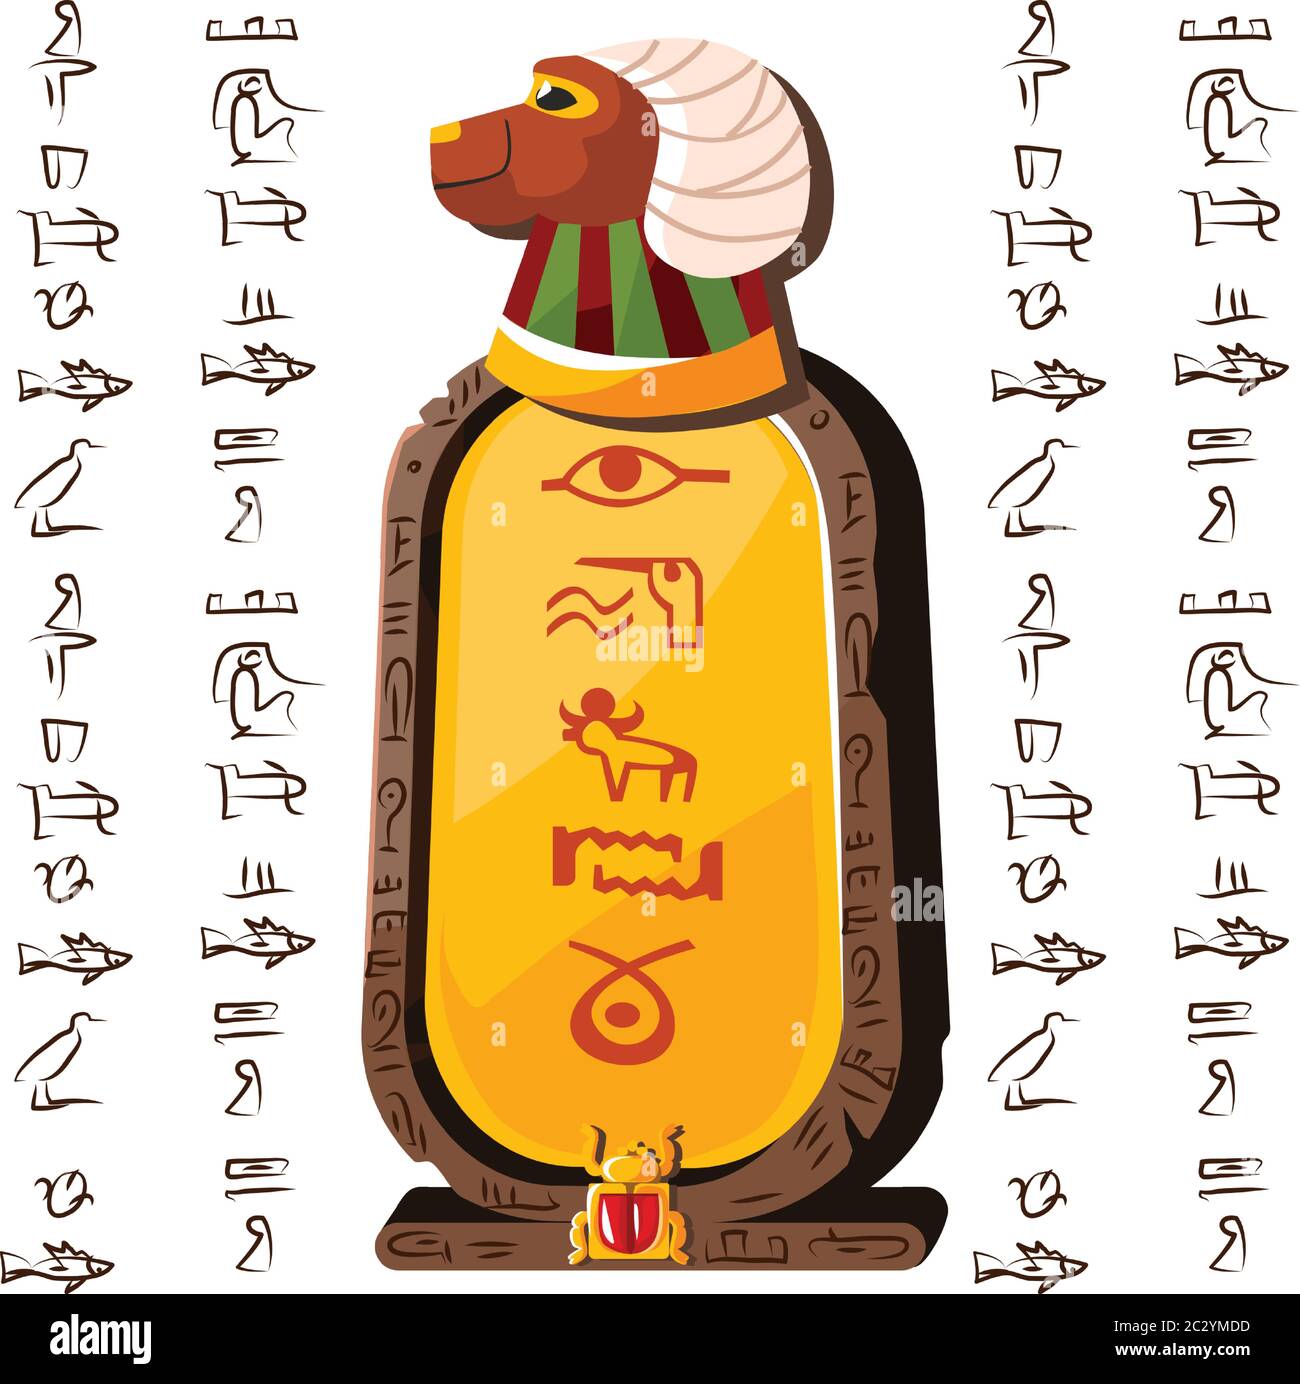 Stone board or clay tablet with ram head and Egyptian hieroglyphs cartoon vector illustration Ancient object for recording storing information, graphi Stock Vector